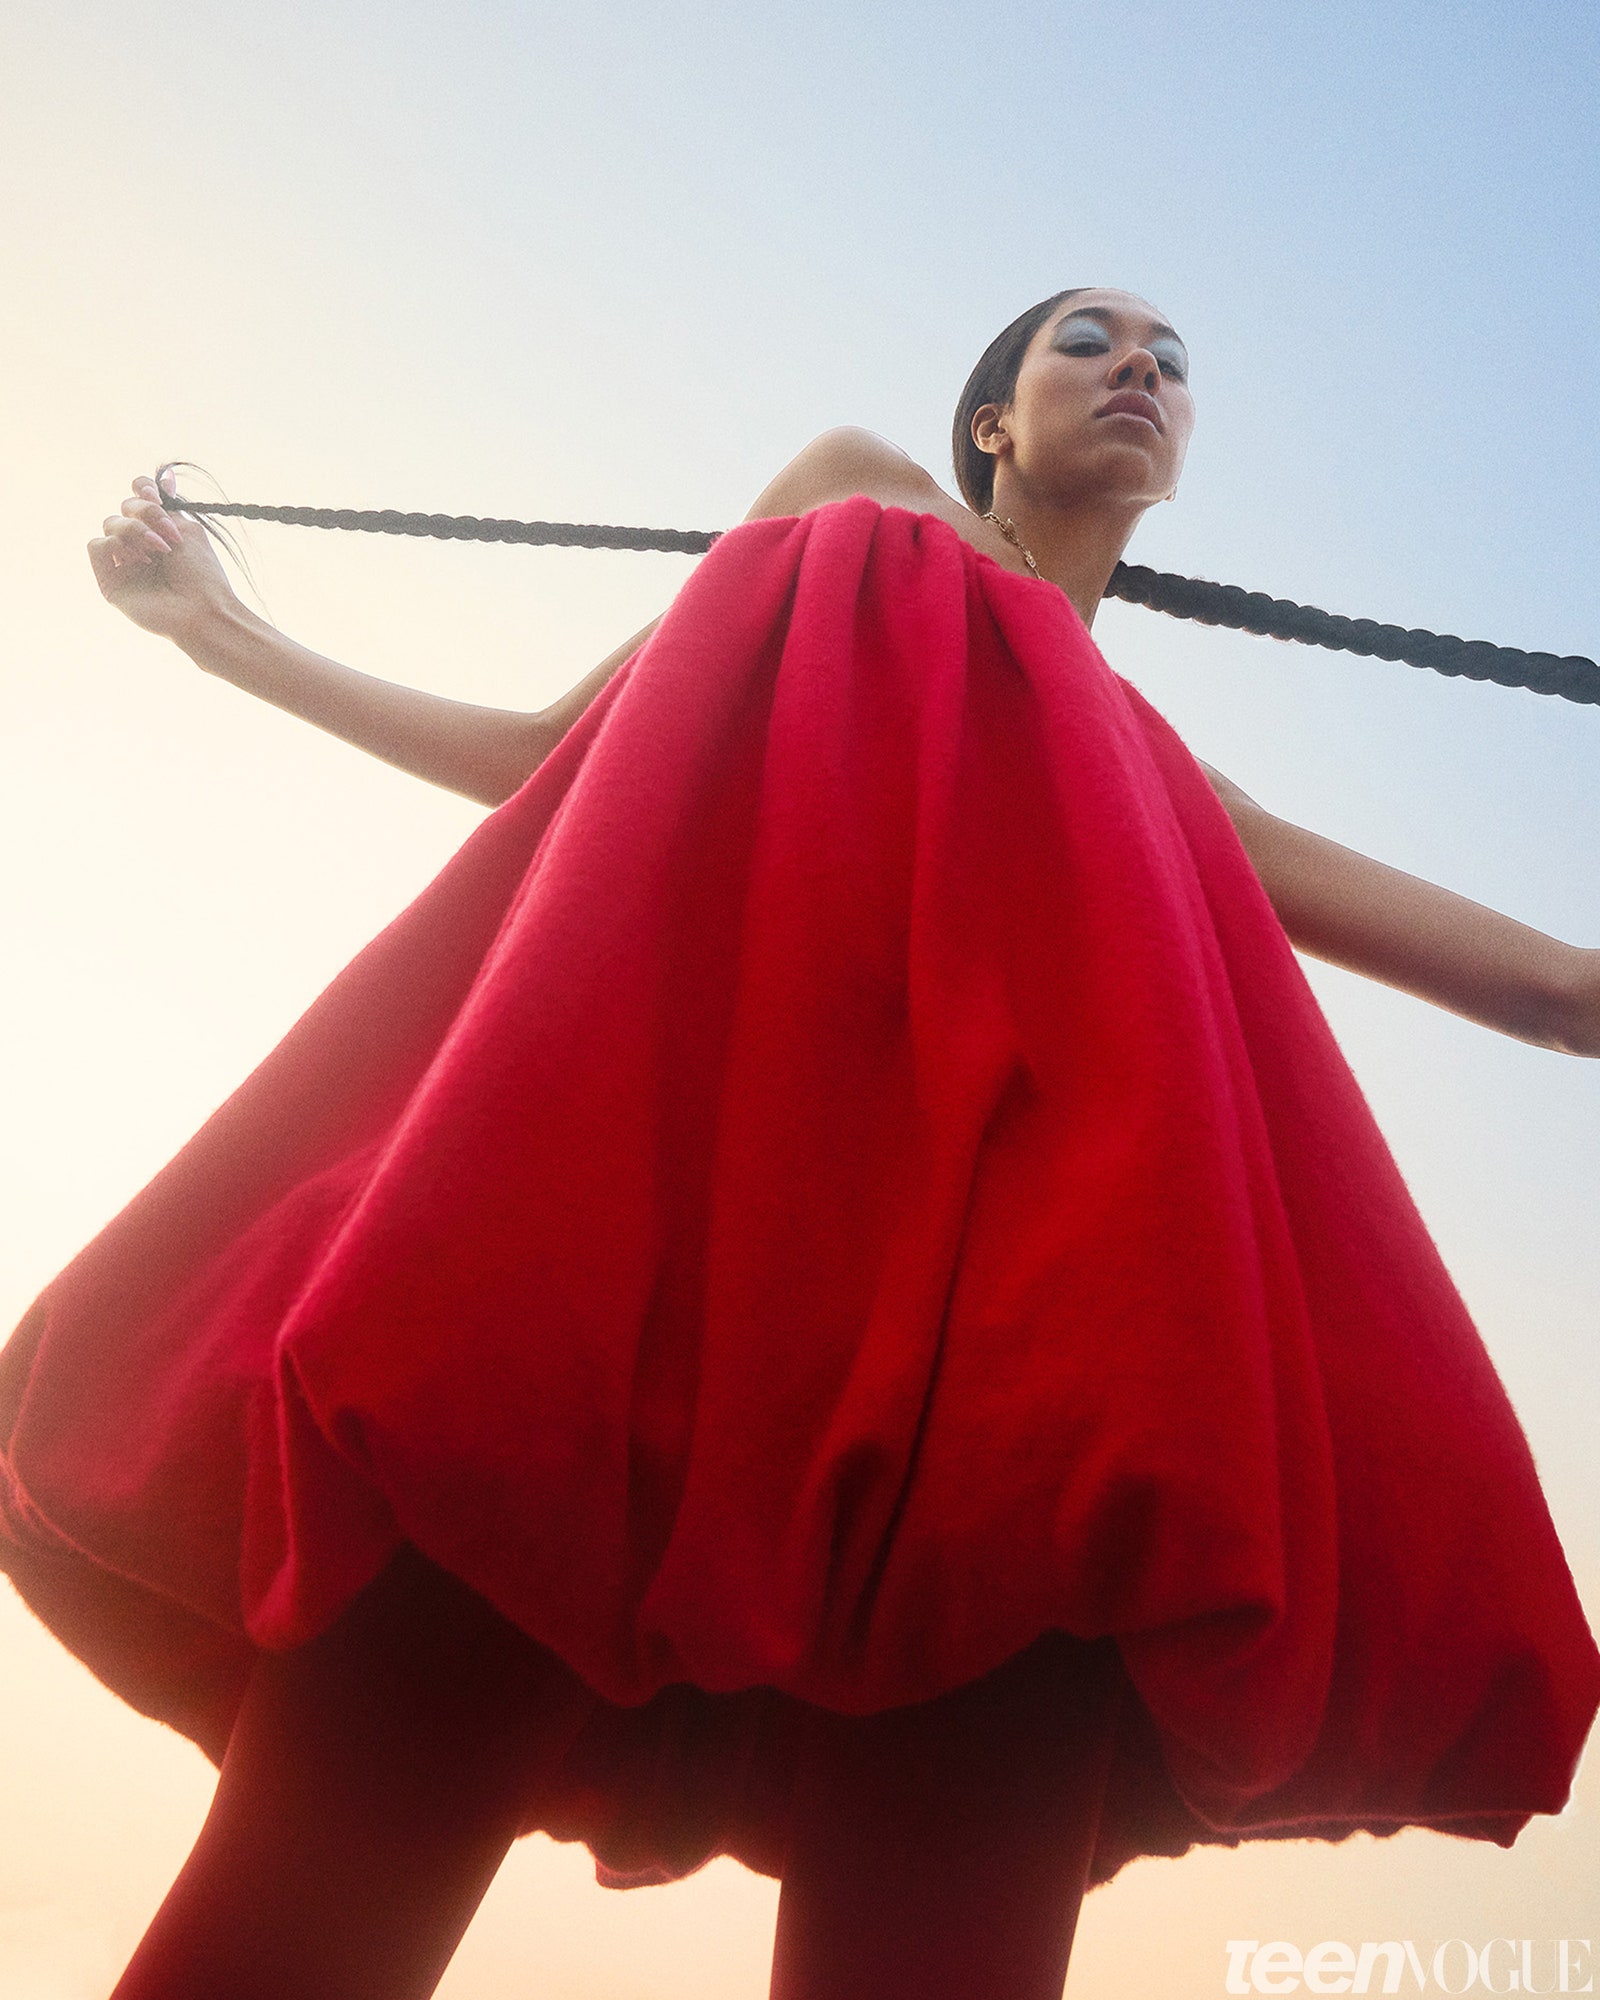 Aoki Lee Simmons standing in red balloon dress against the sky.